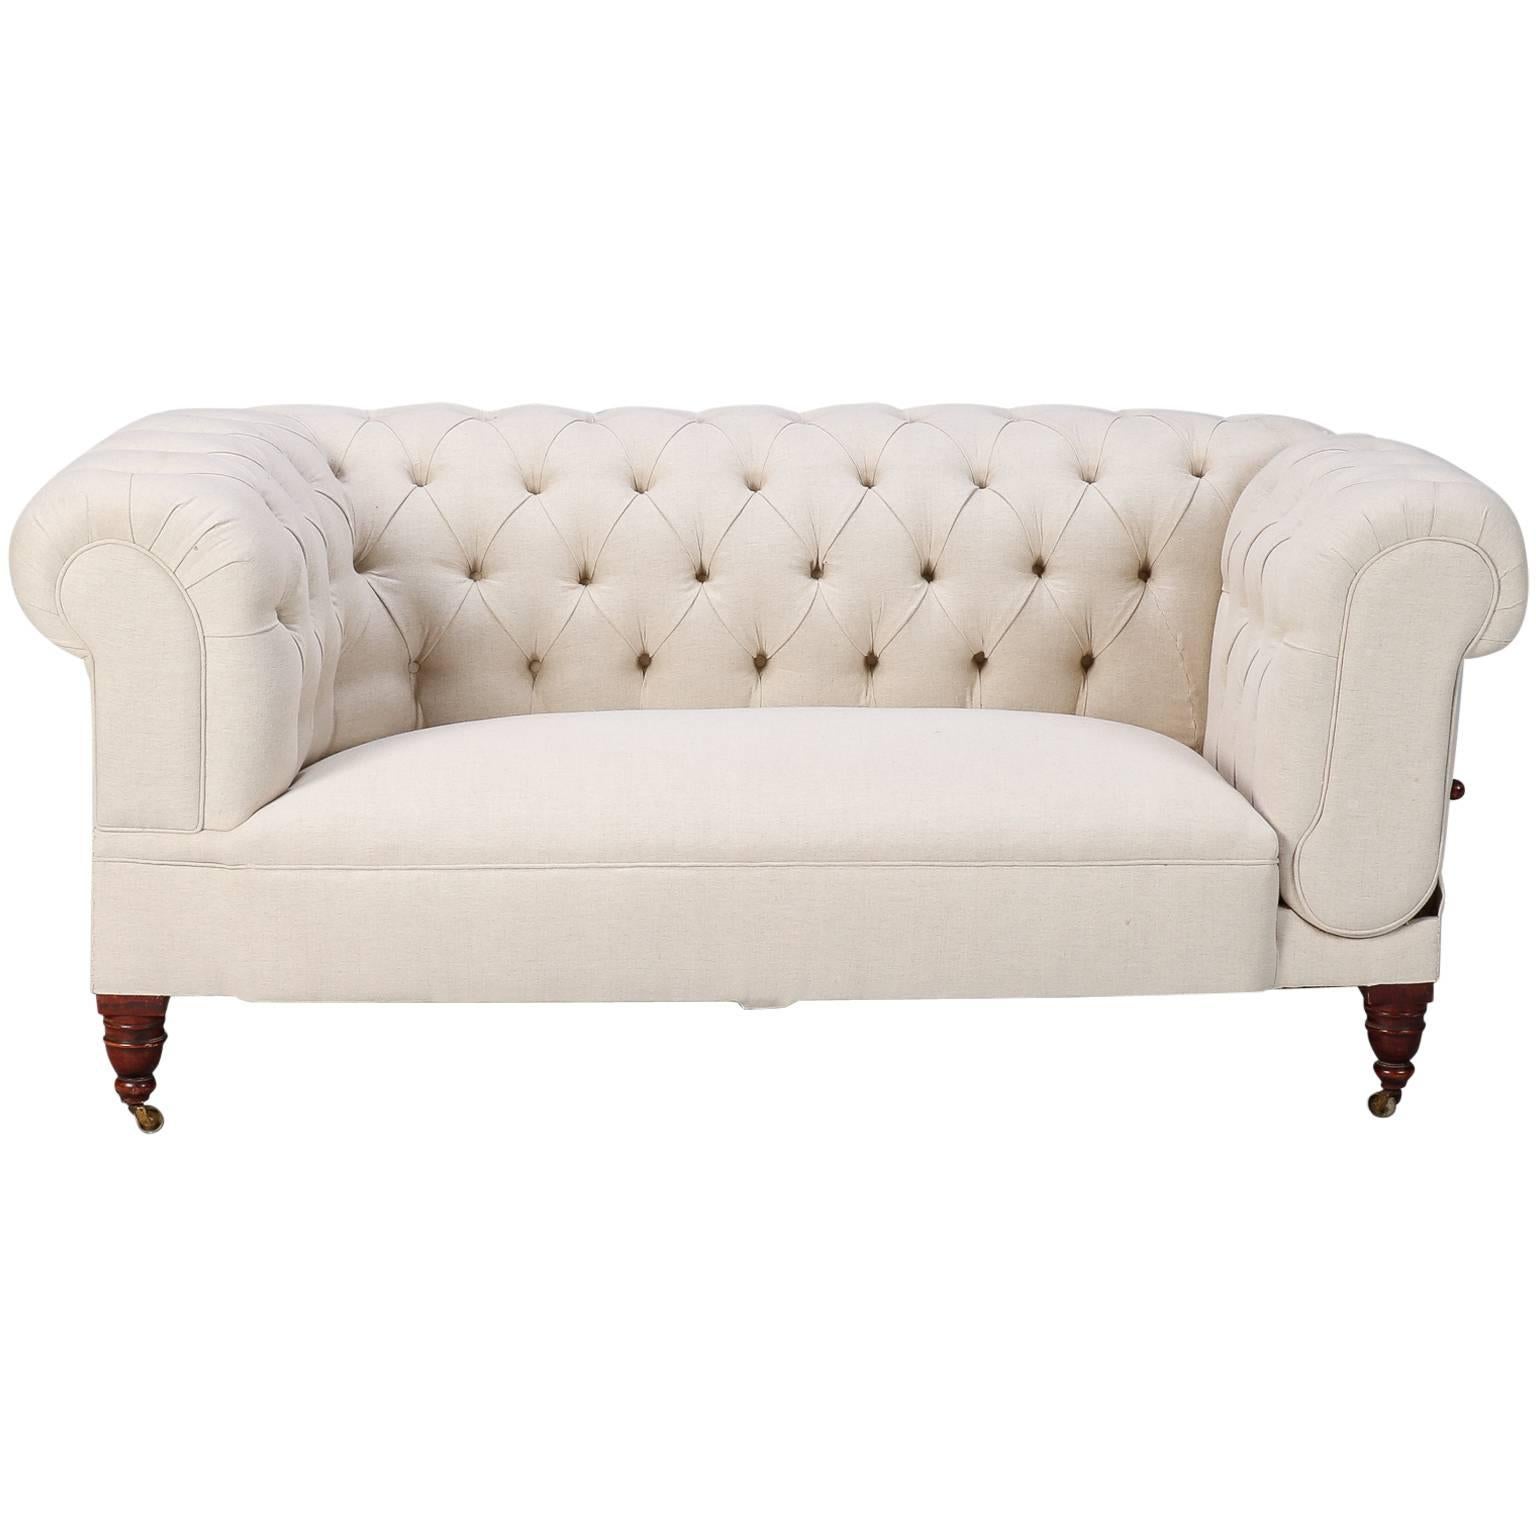 Linen Chesterfield Sofa with Collapsible Arm